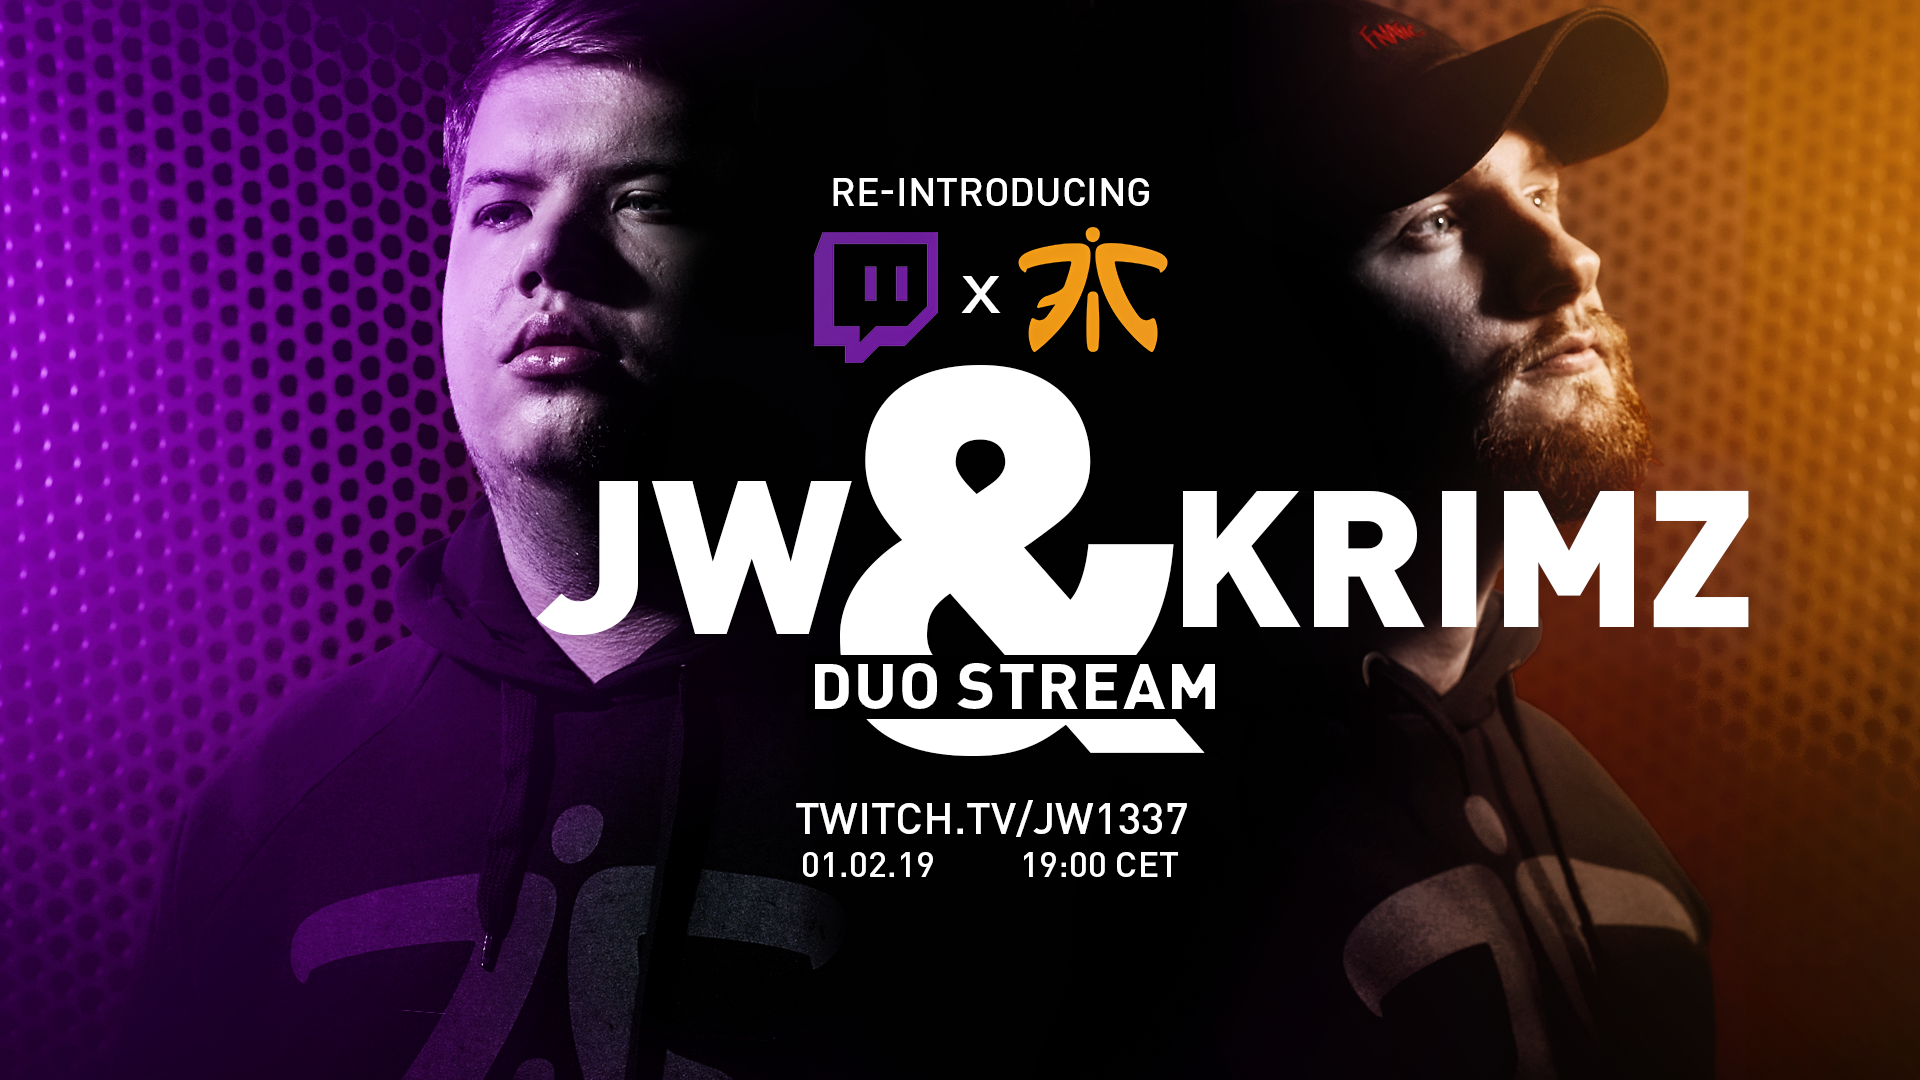 Fnatic sign exclusive streaming partnership with Twitch